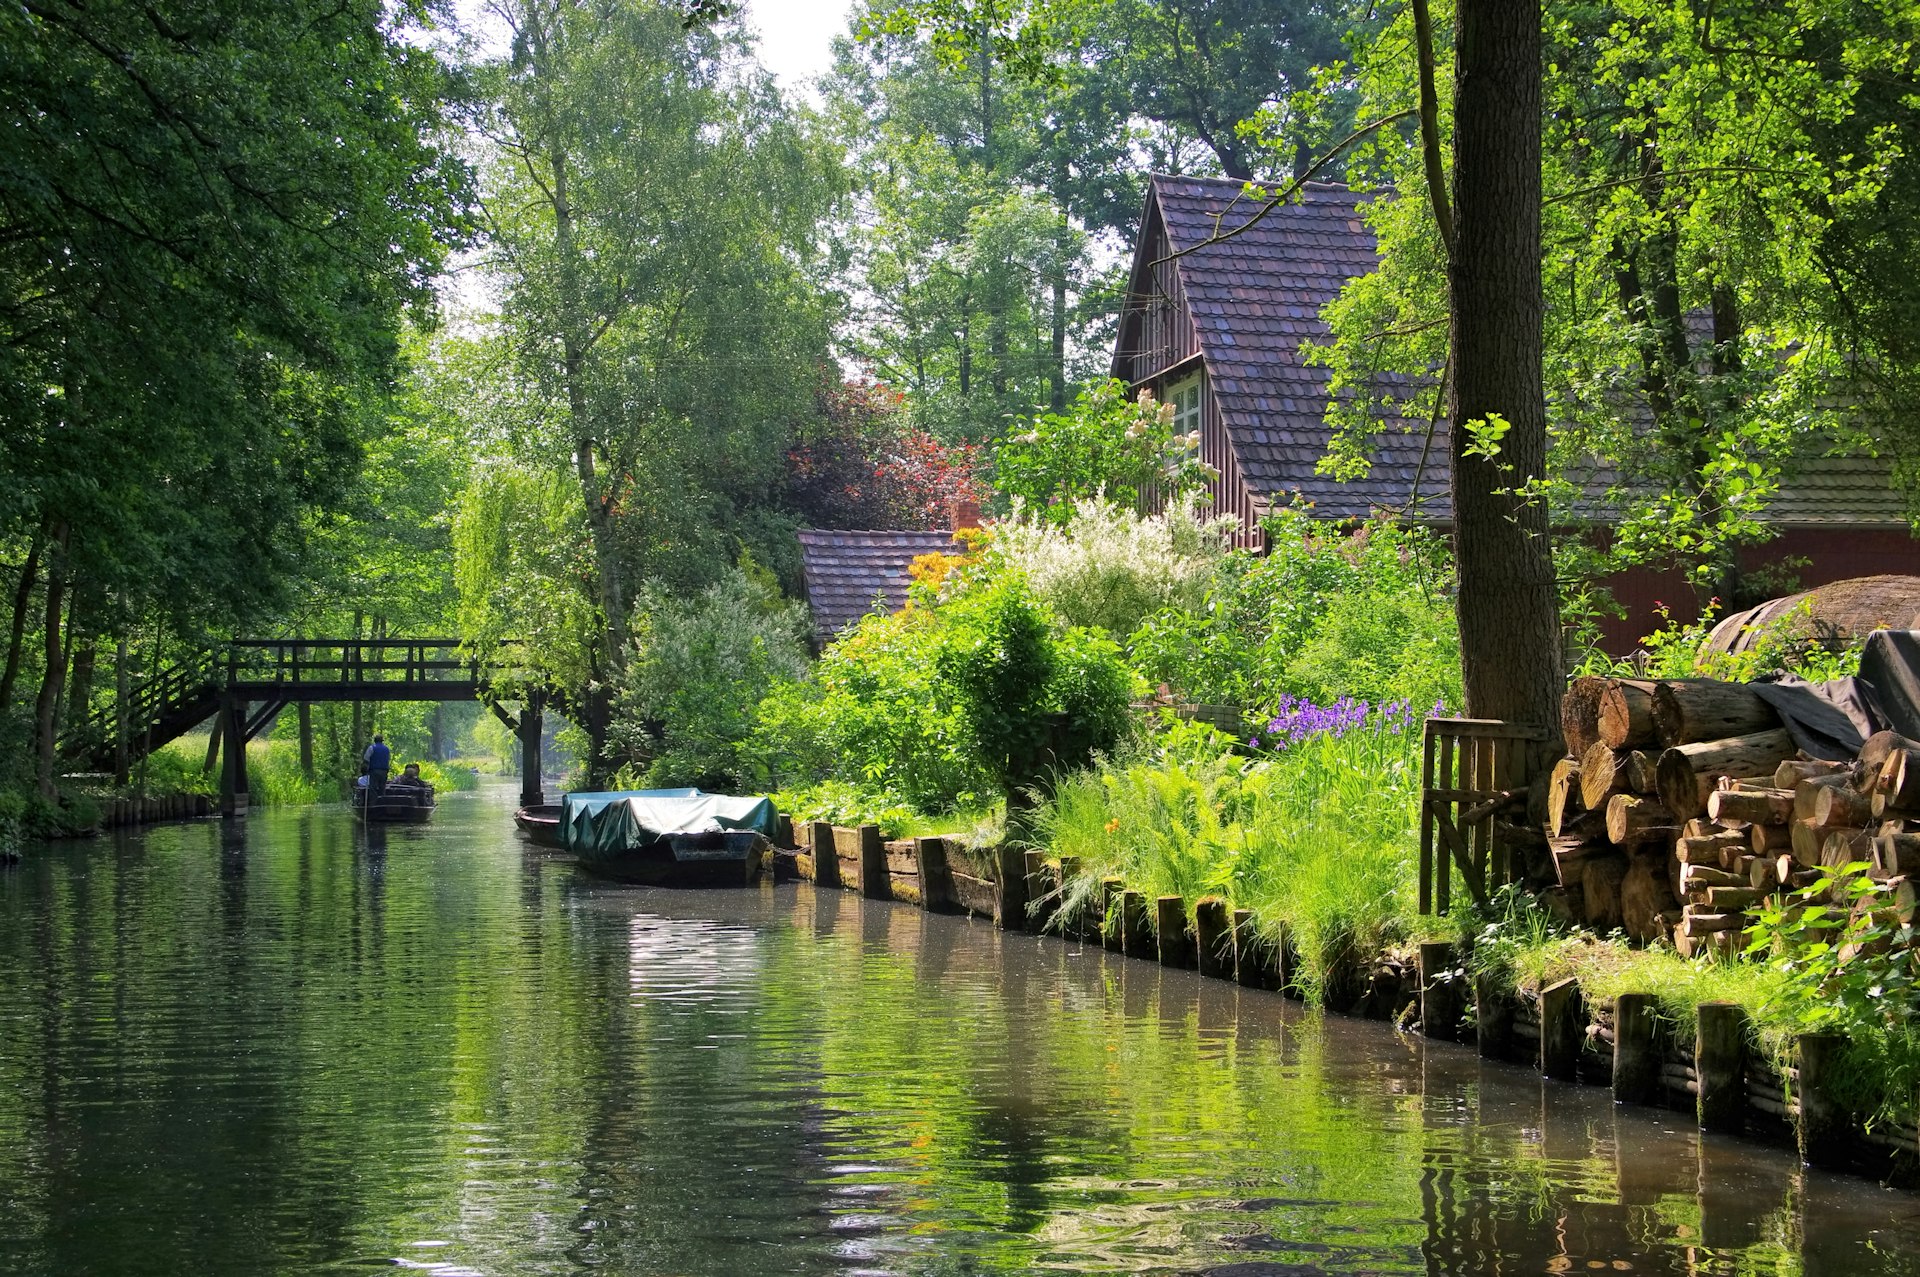 A boat floating past a wood-framed house on a greenery-lined canal in the Spreewald region of Germany